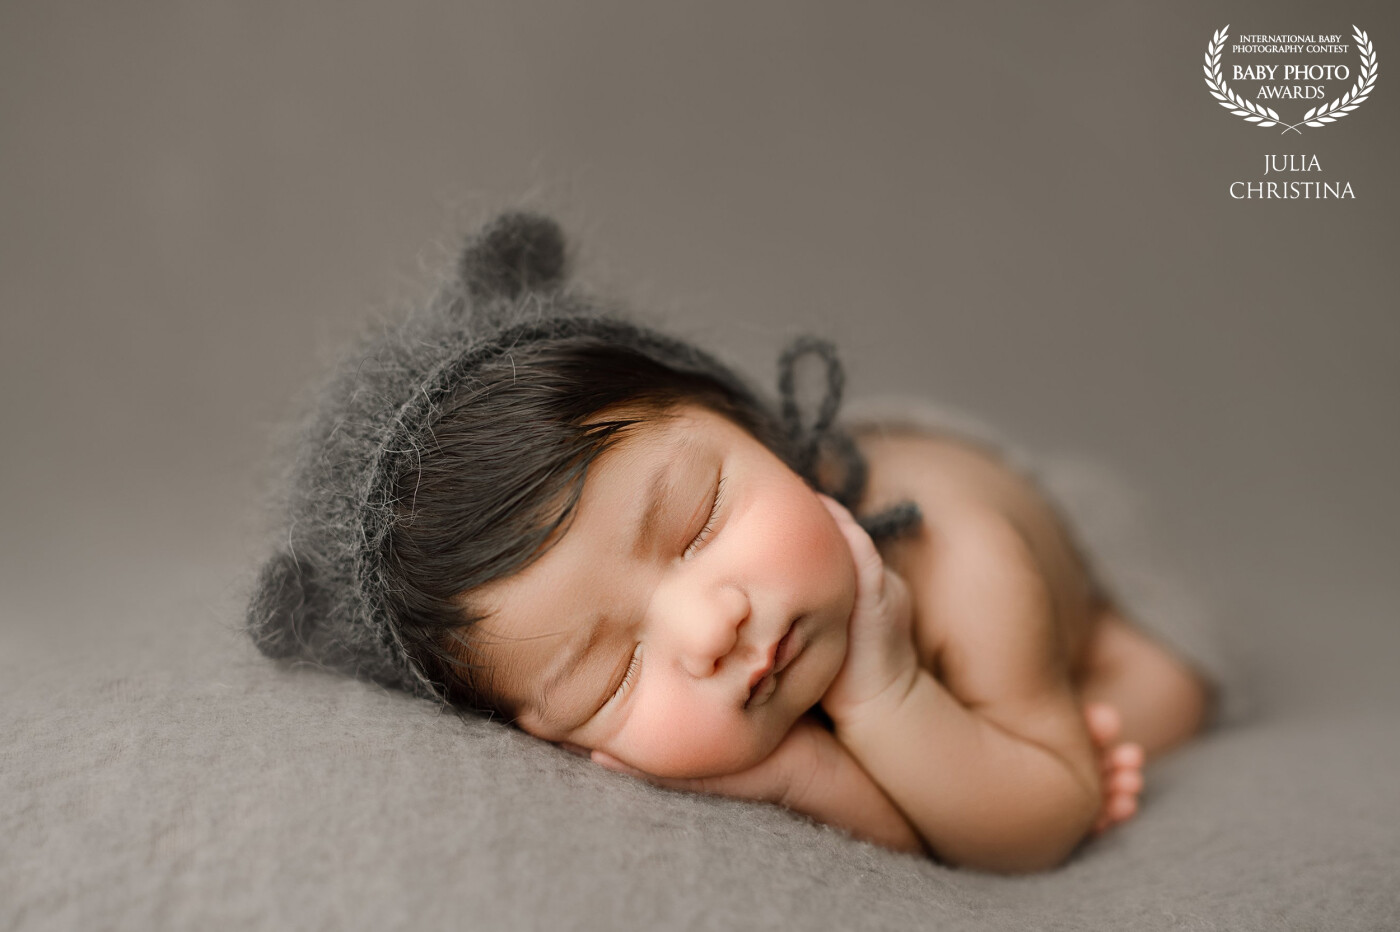 posed newborn baby in "timber pose" with grey bear bonnet on.